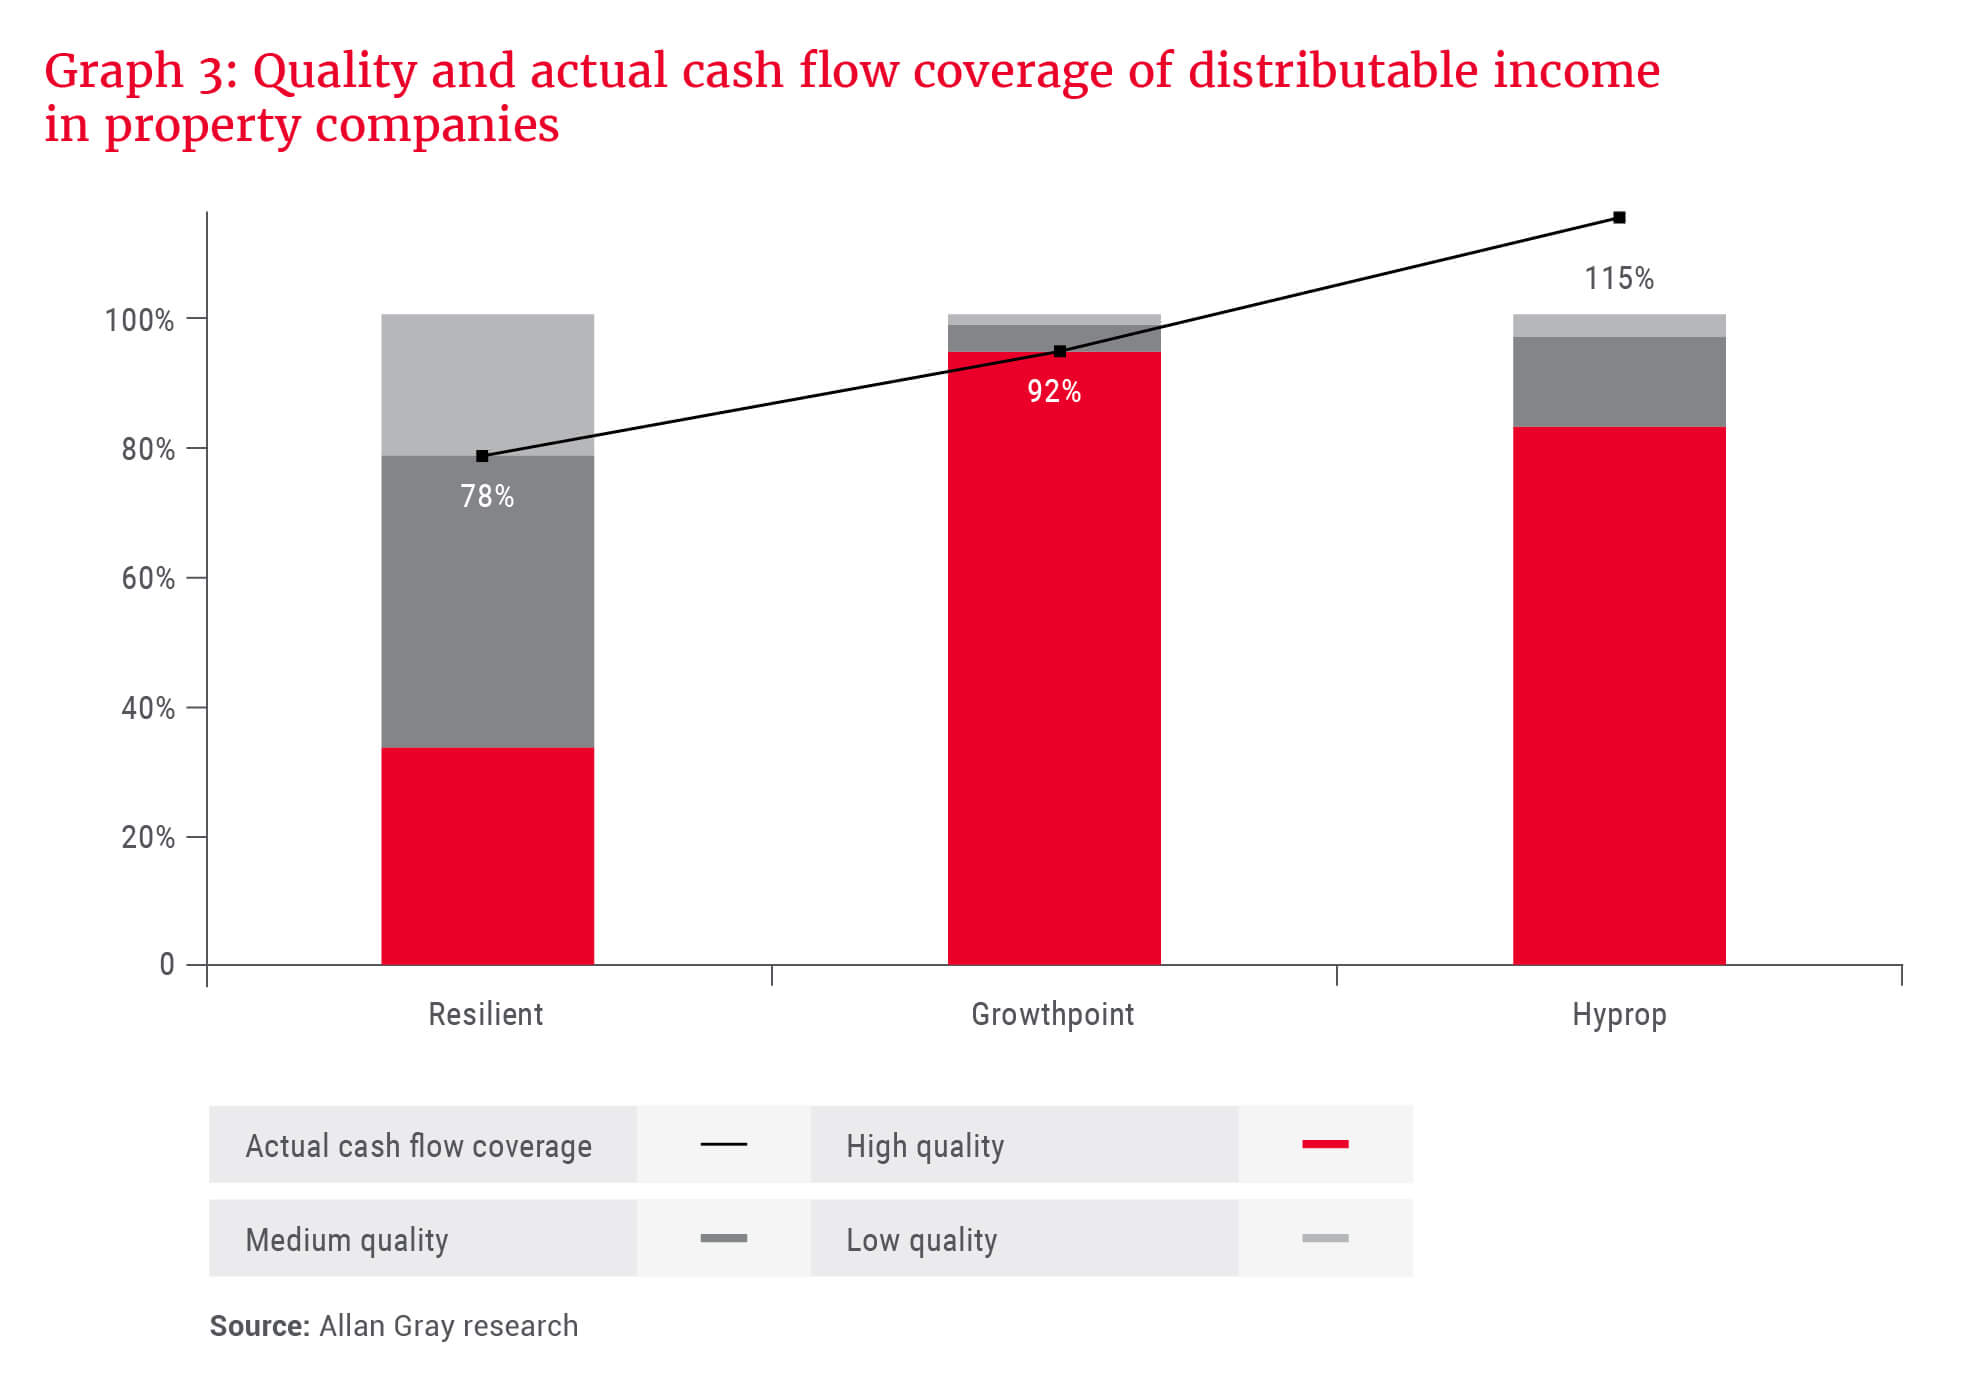 Quality and actual cash flow coverage of distributable income in property companies - Allan Gray